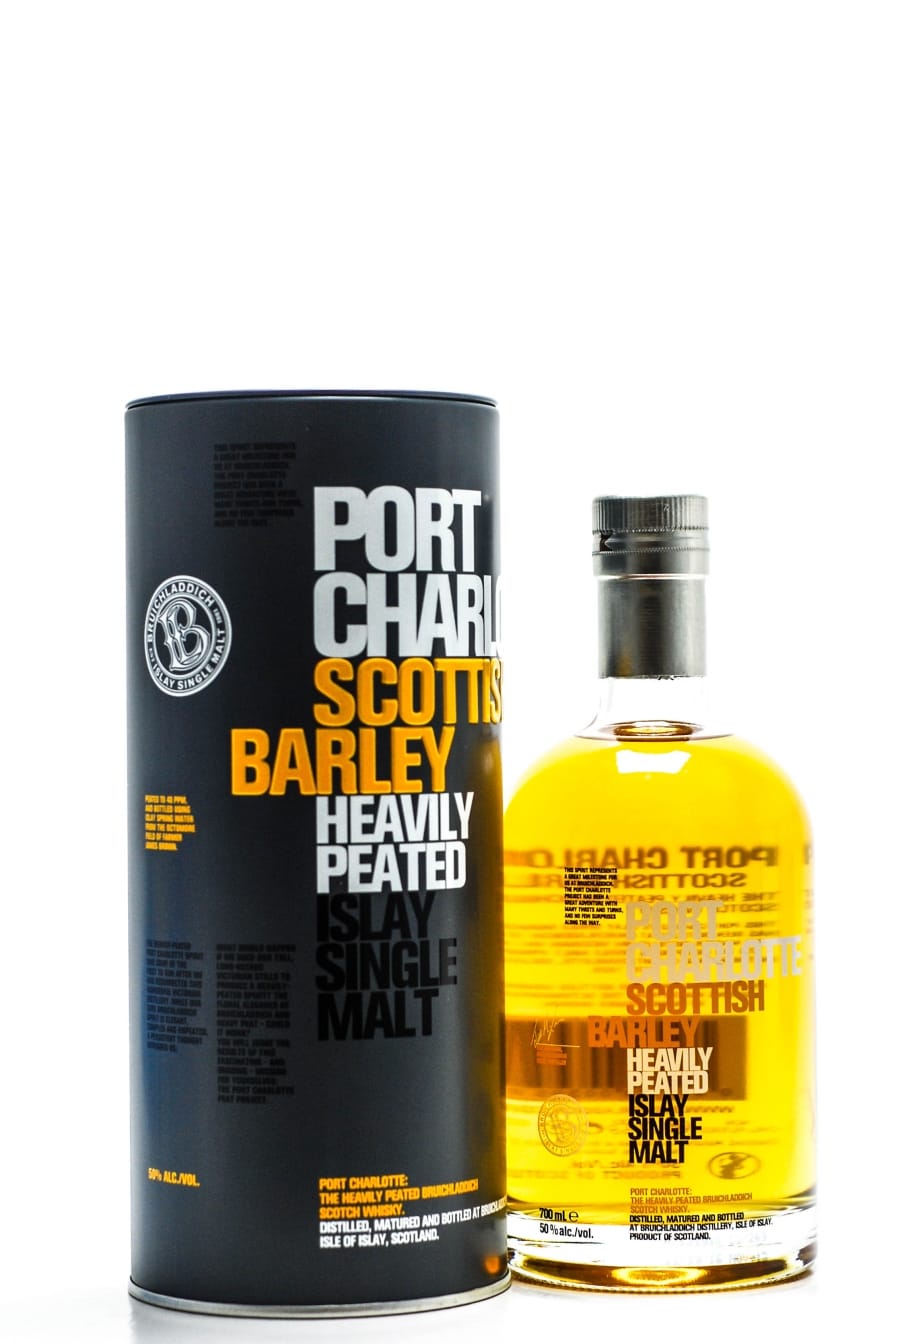 Port Charlotte - Port Charlotte Scottish Barley Heavily Peated 50% NAS In Original Container